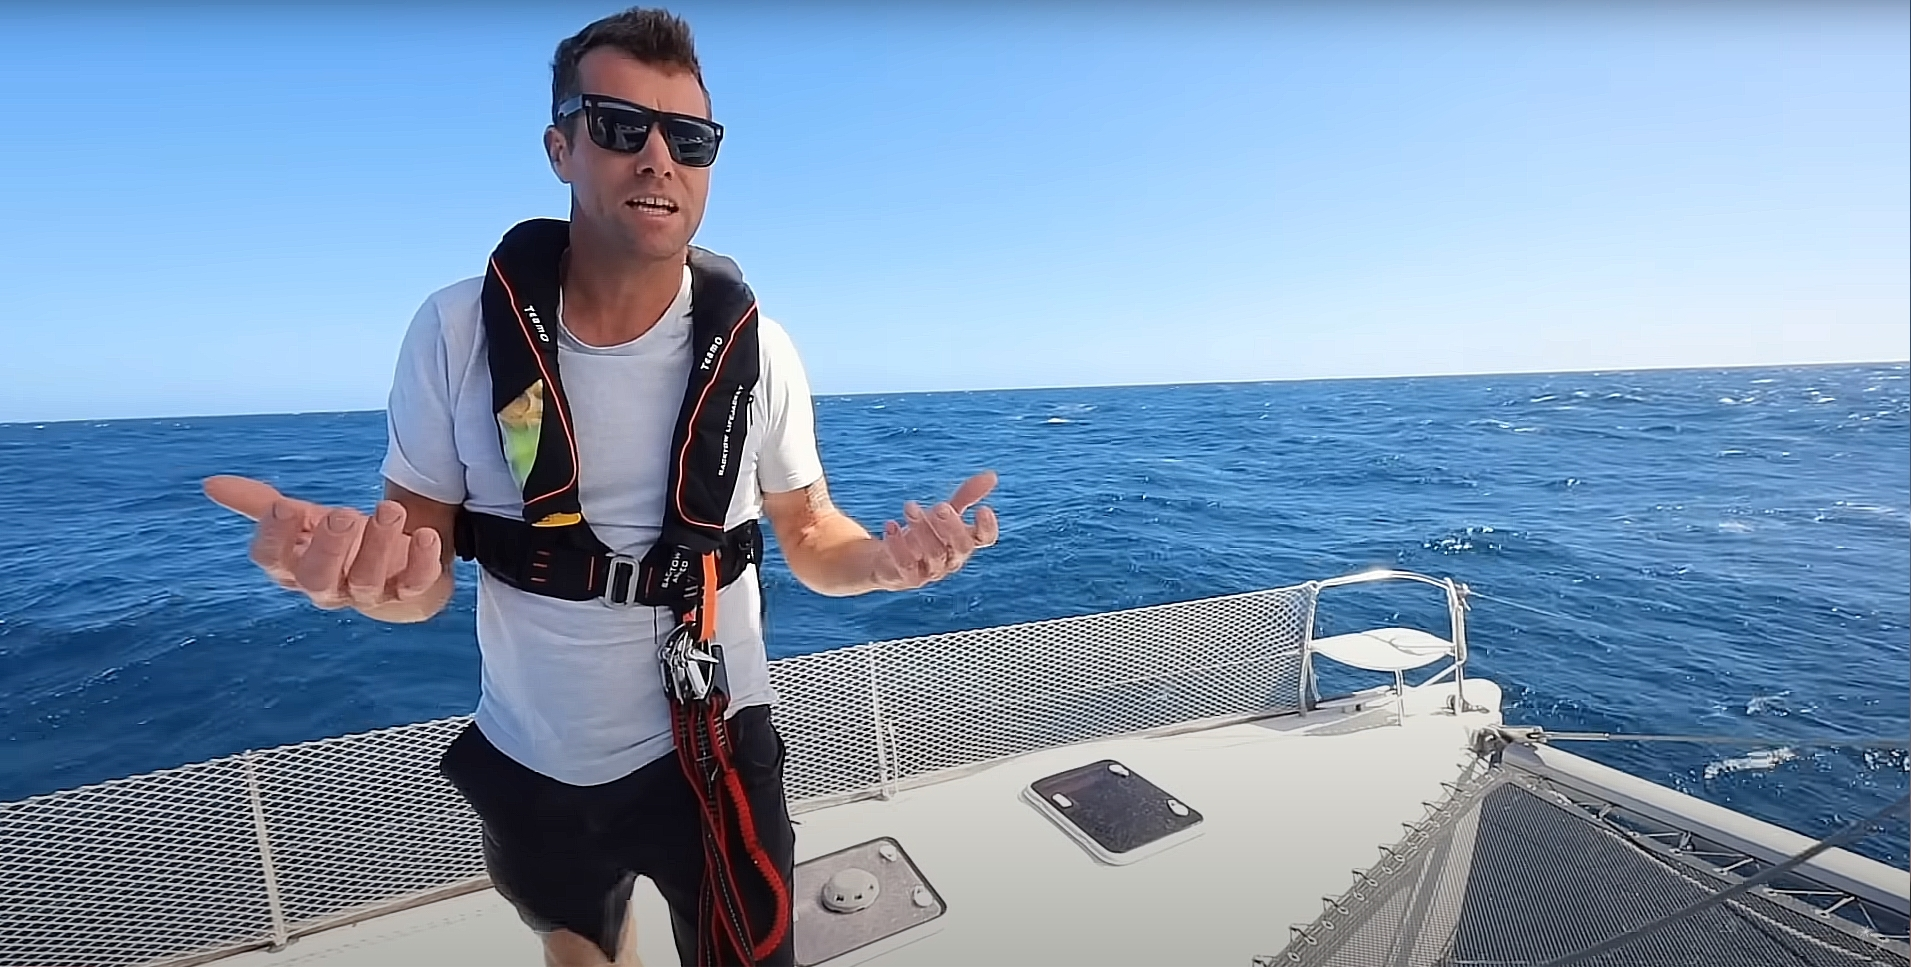 Picture of Ben from Sailing Nahoa wearing a TeamO Offshore PFD from Indie Marine in his sailing video https://youtu.be/cqNOjVgDpQg?t=563